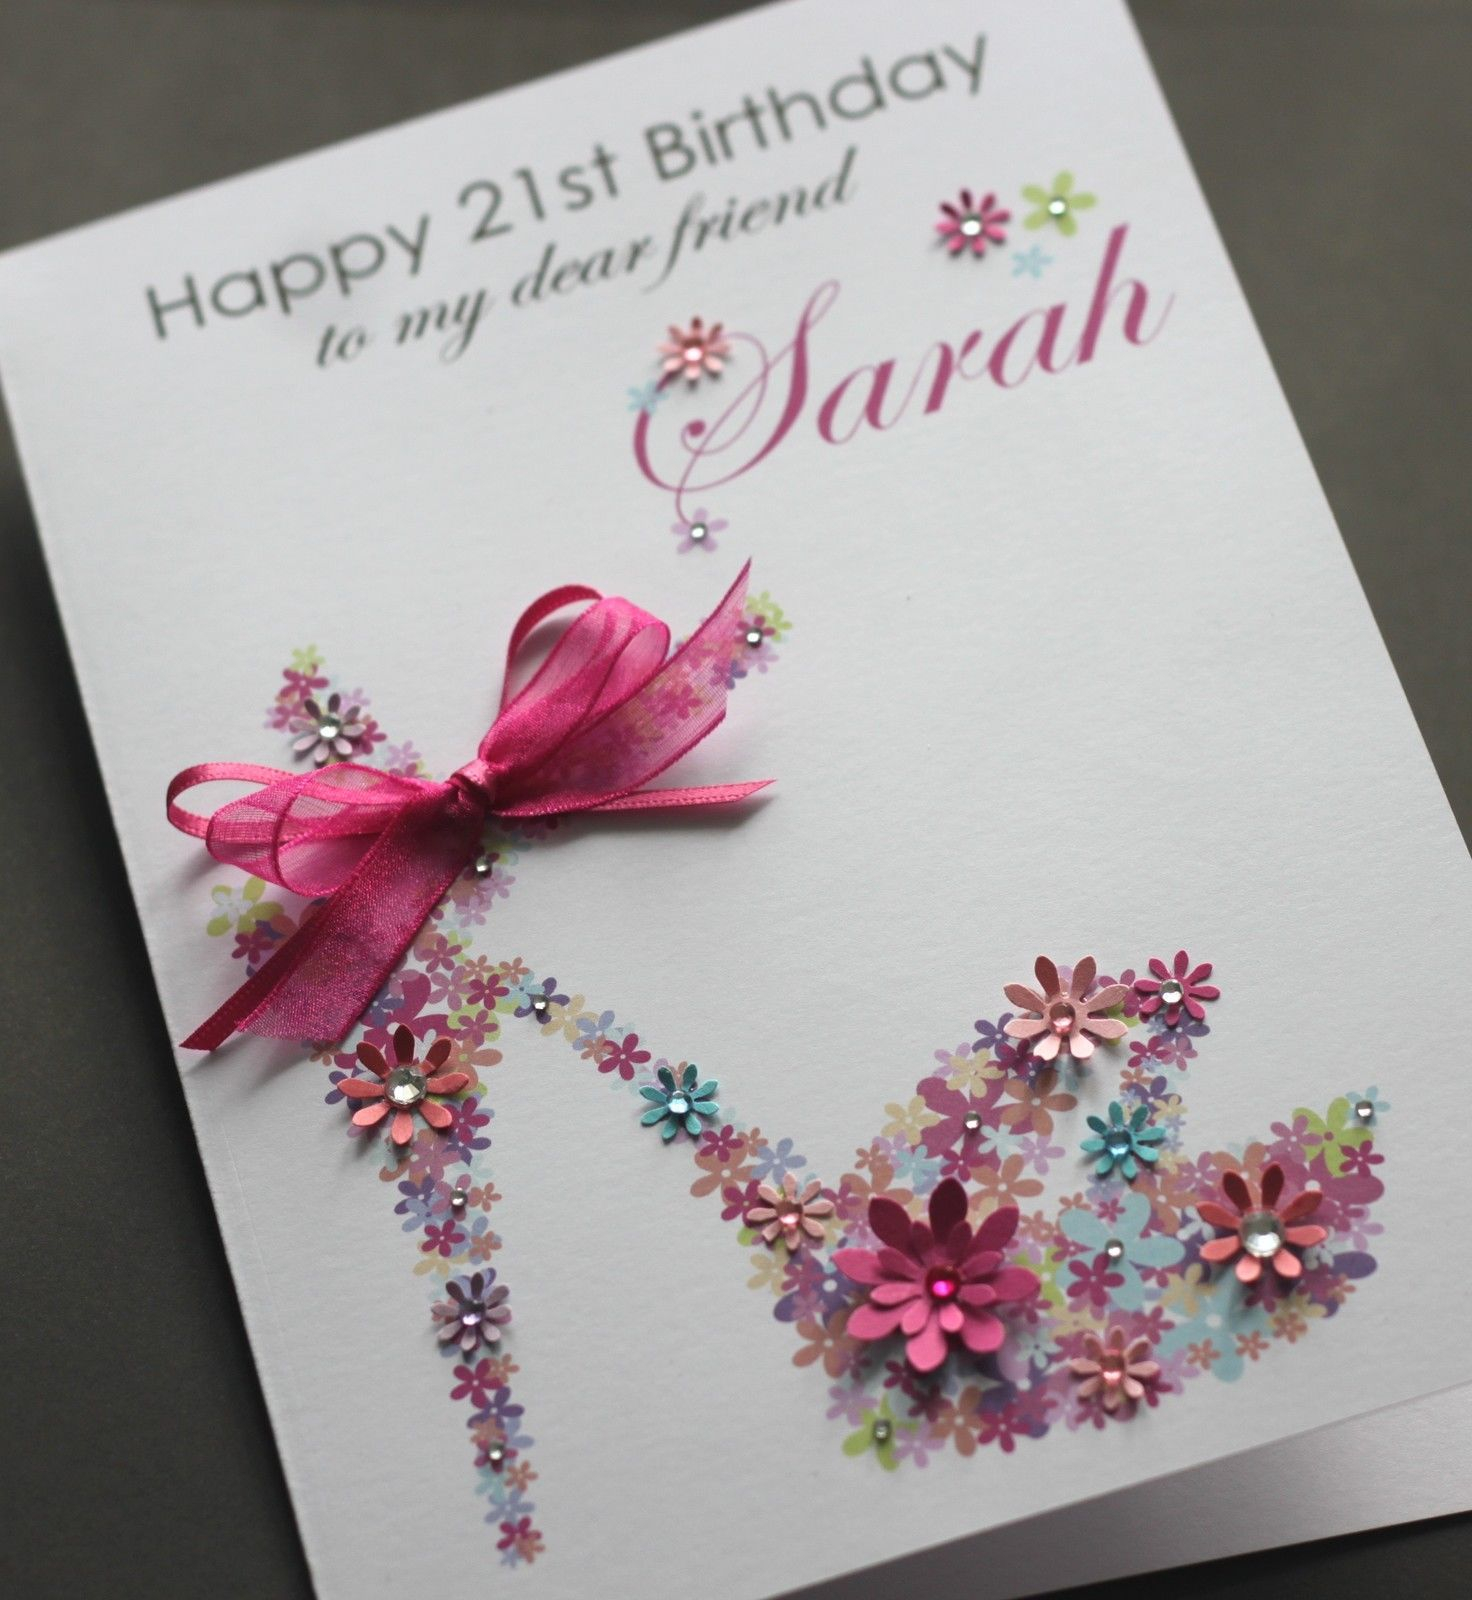 21St Birthday Card Making Ideas Cool Birthday Card Ideas For Friends Design Balloons Decoration